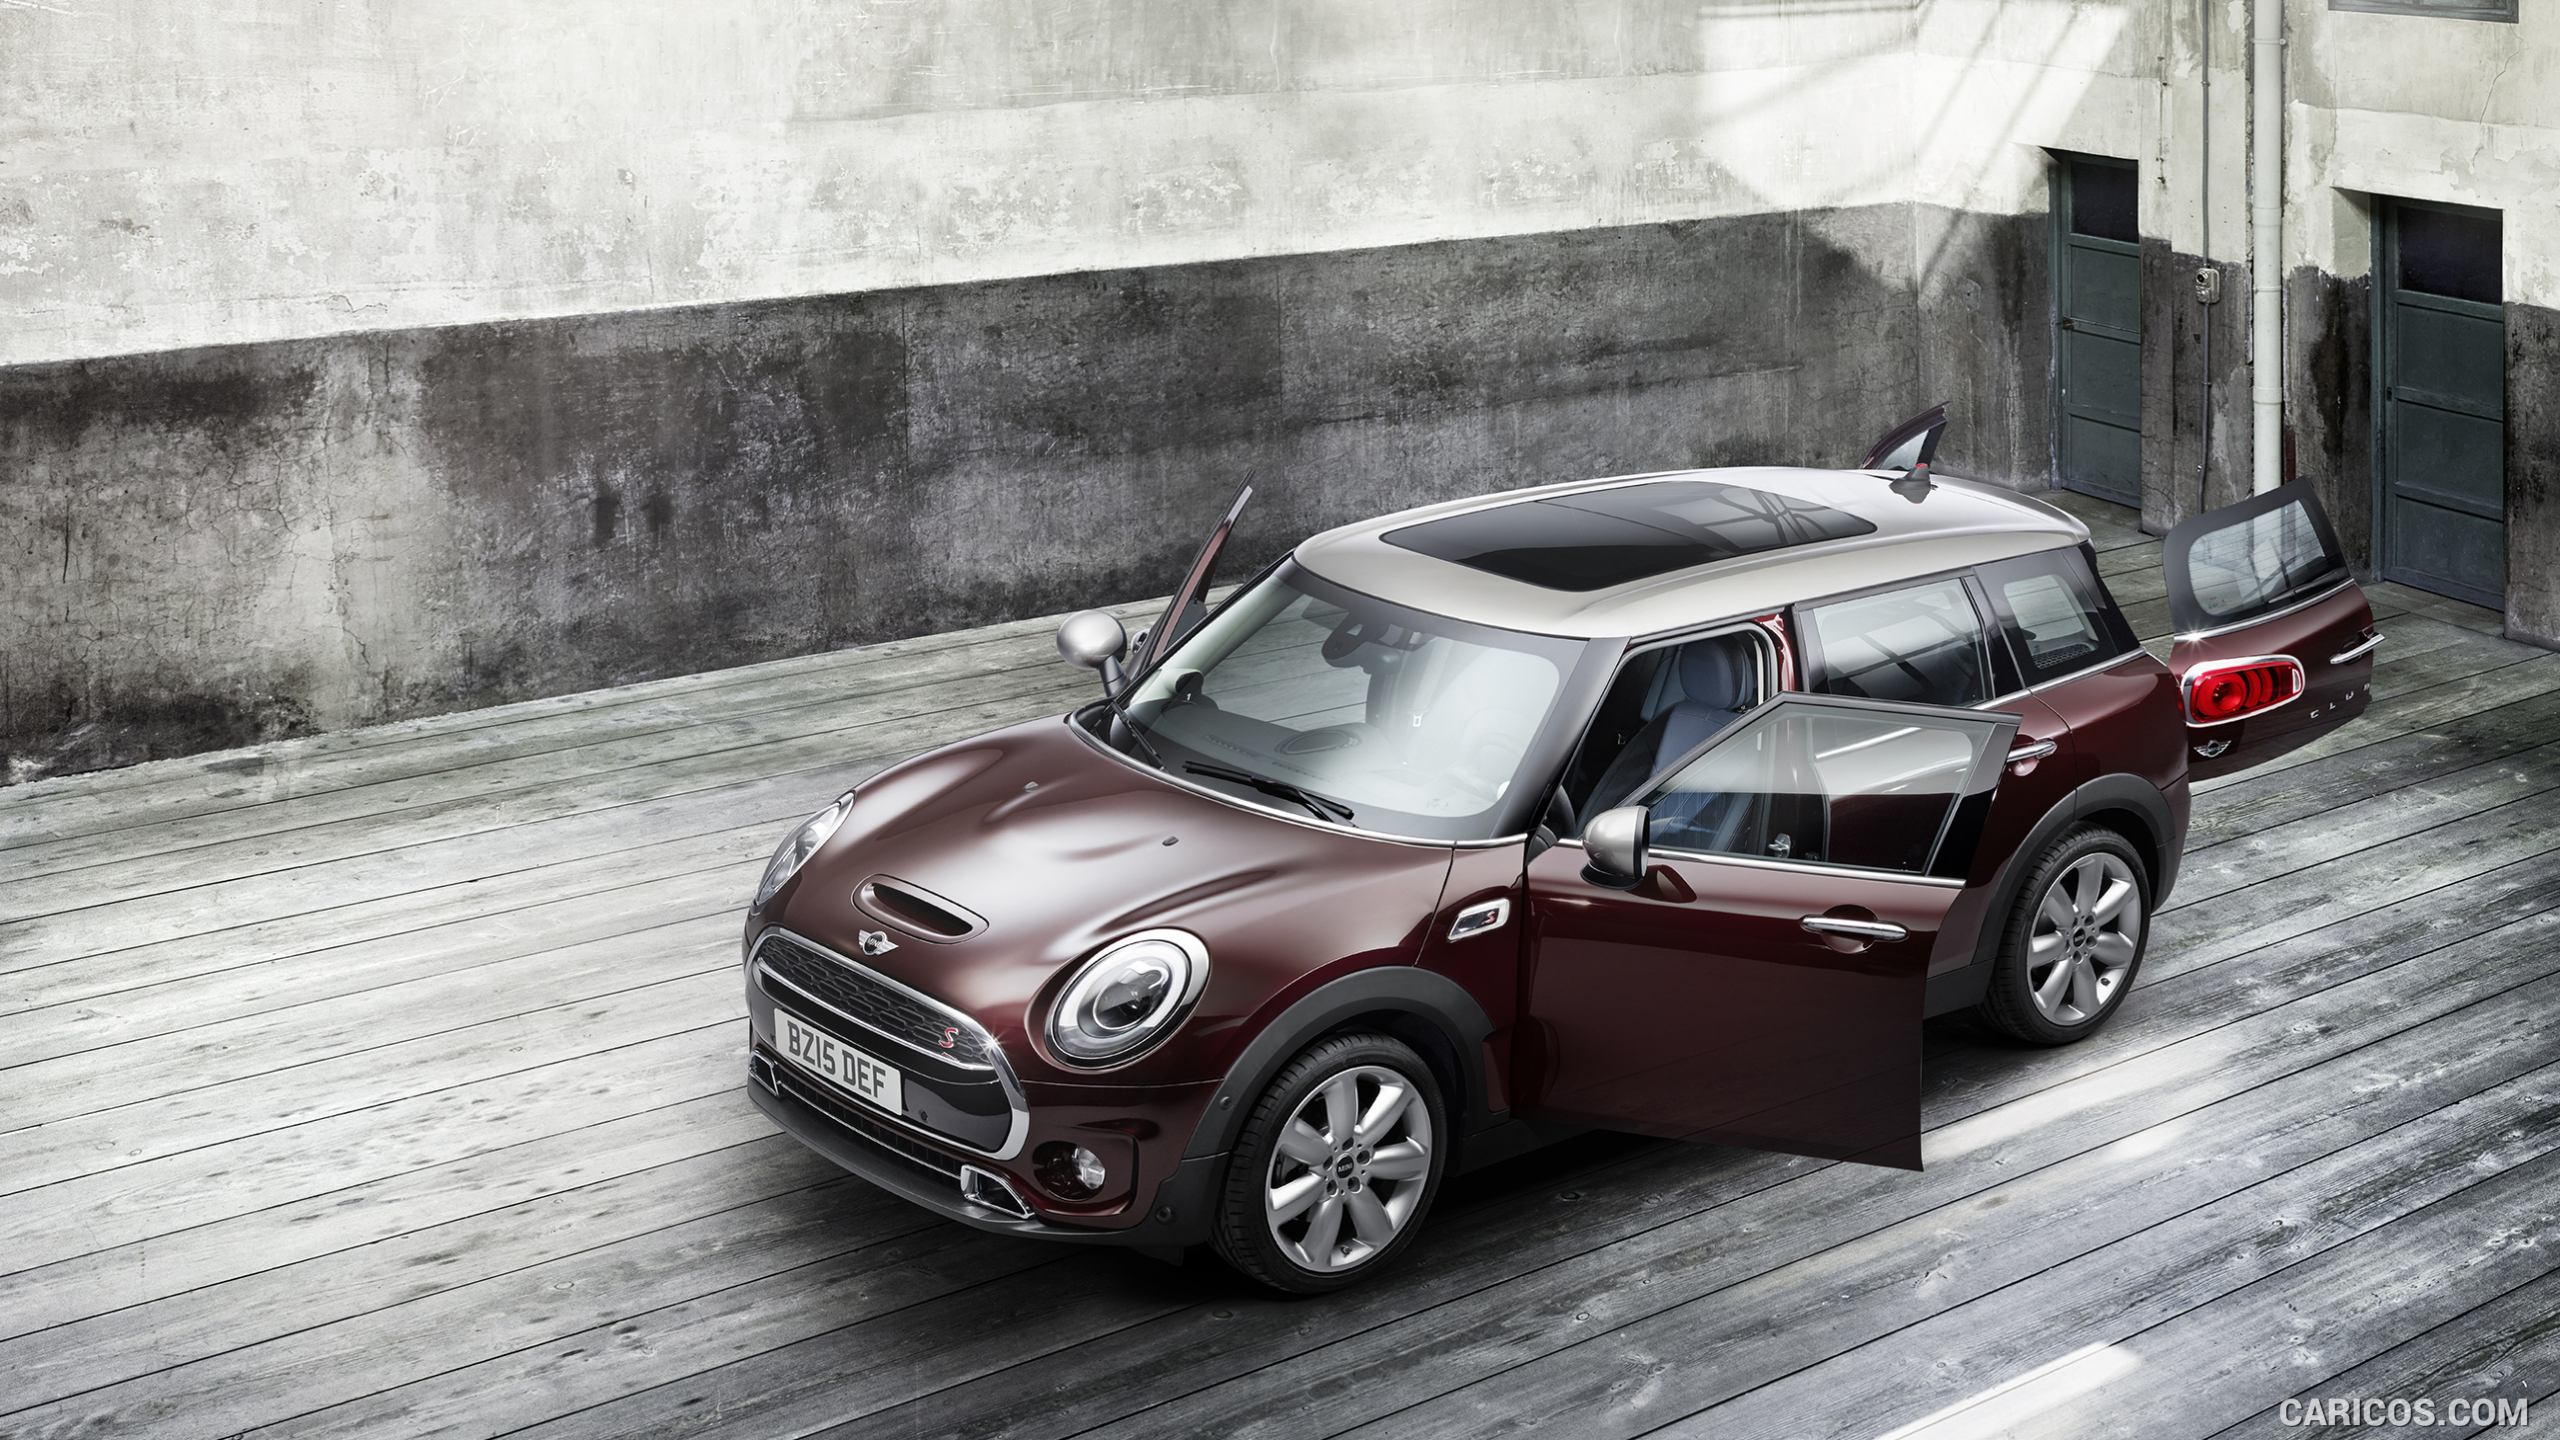 2016 MINI Clubman S - Front, #13 of 380